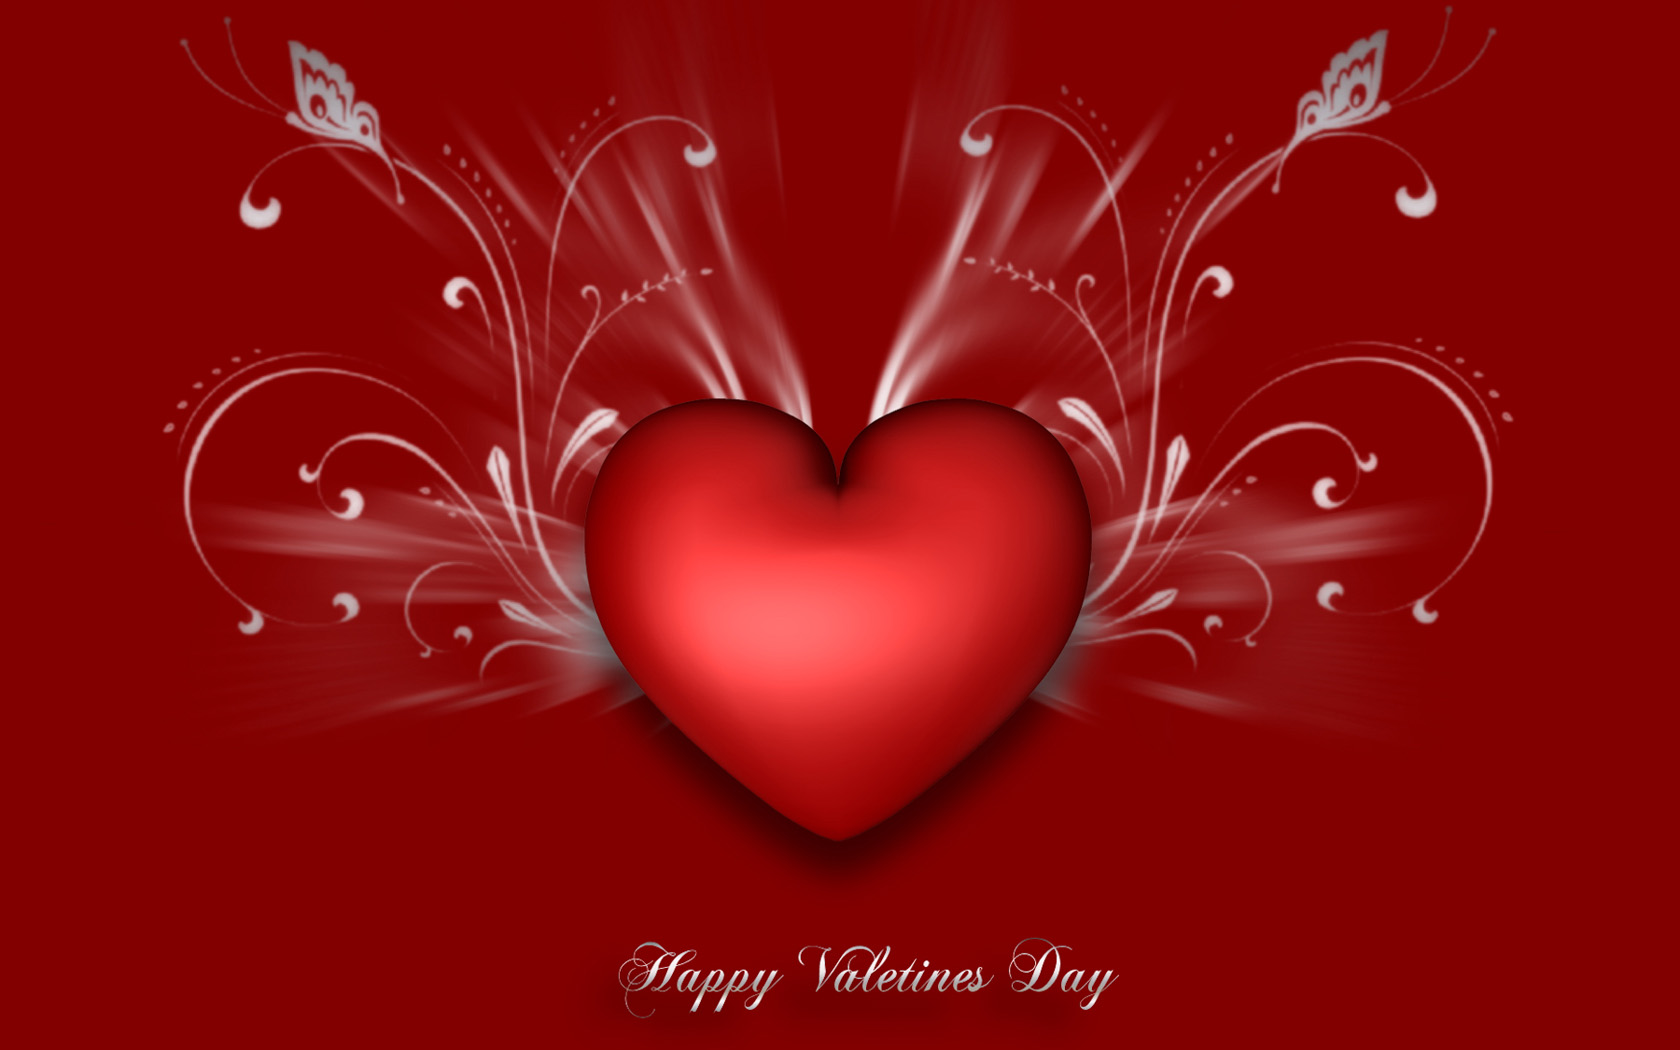 Cute Valentines Day Wallpaper 10815 Hd Wallpapers in Cute   Imagesci